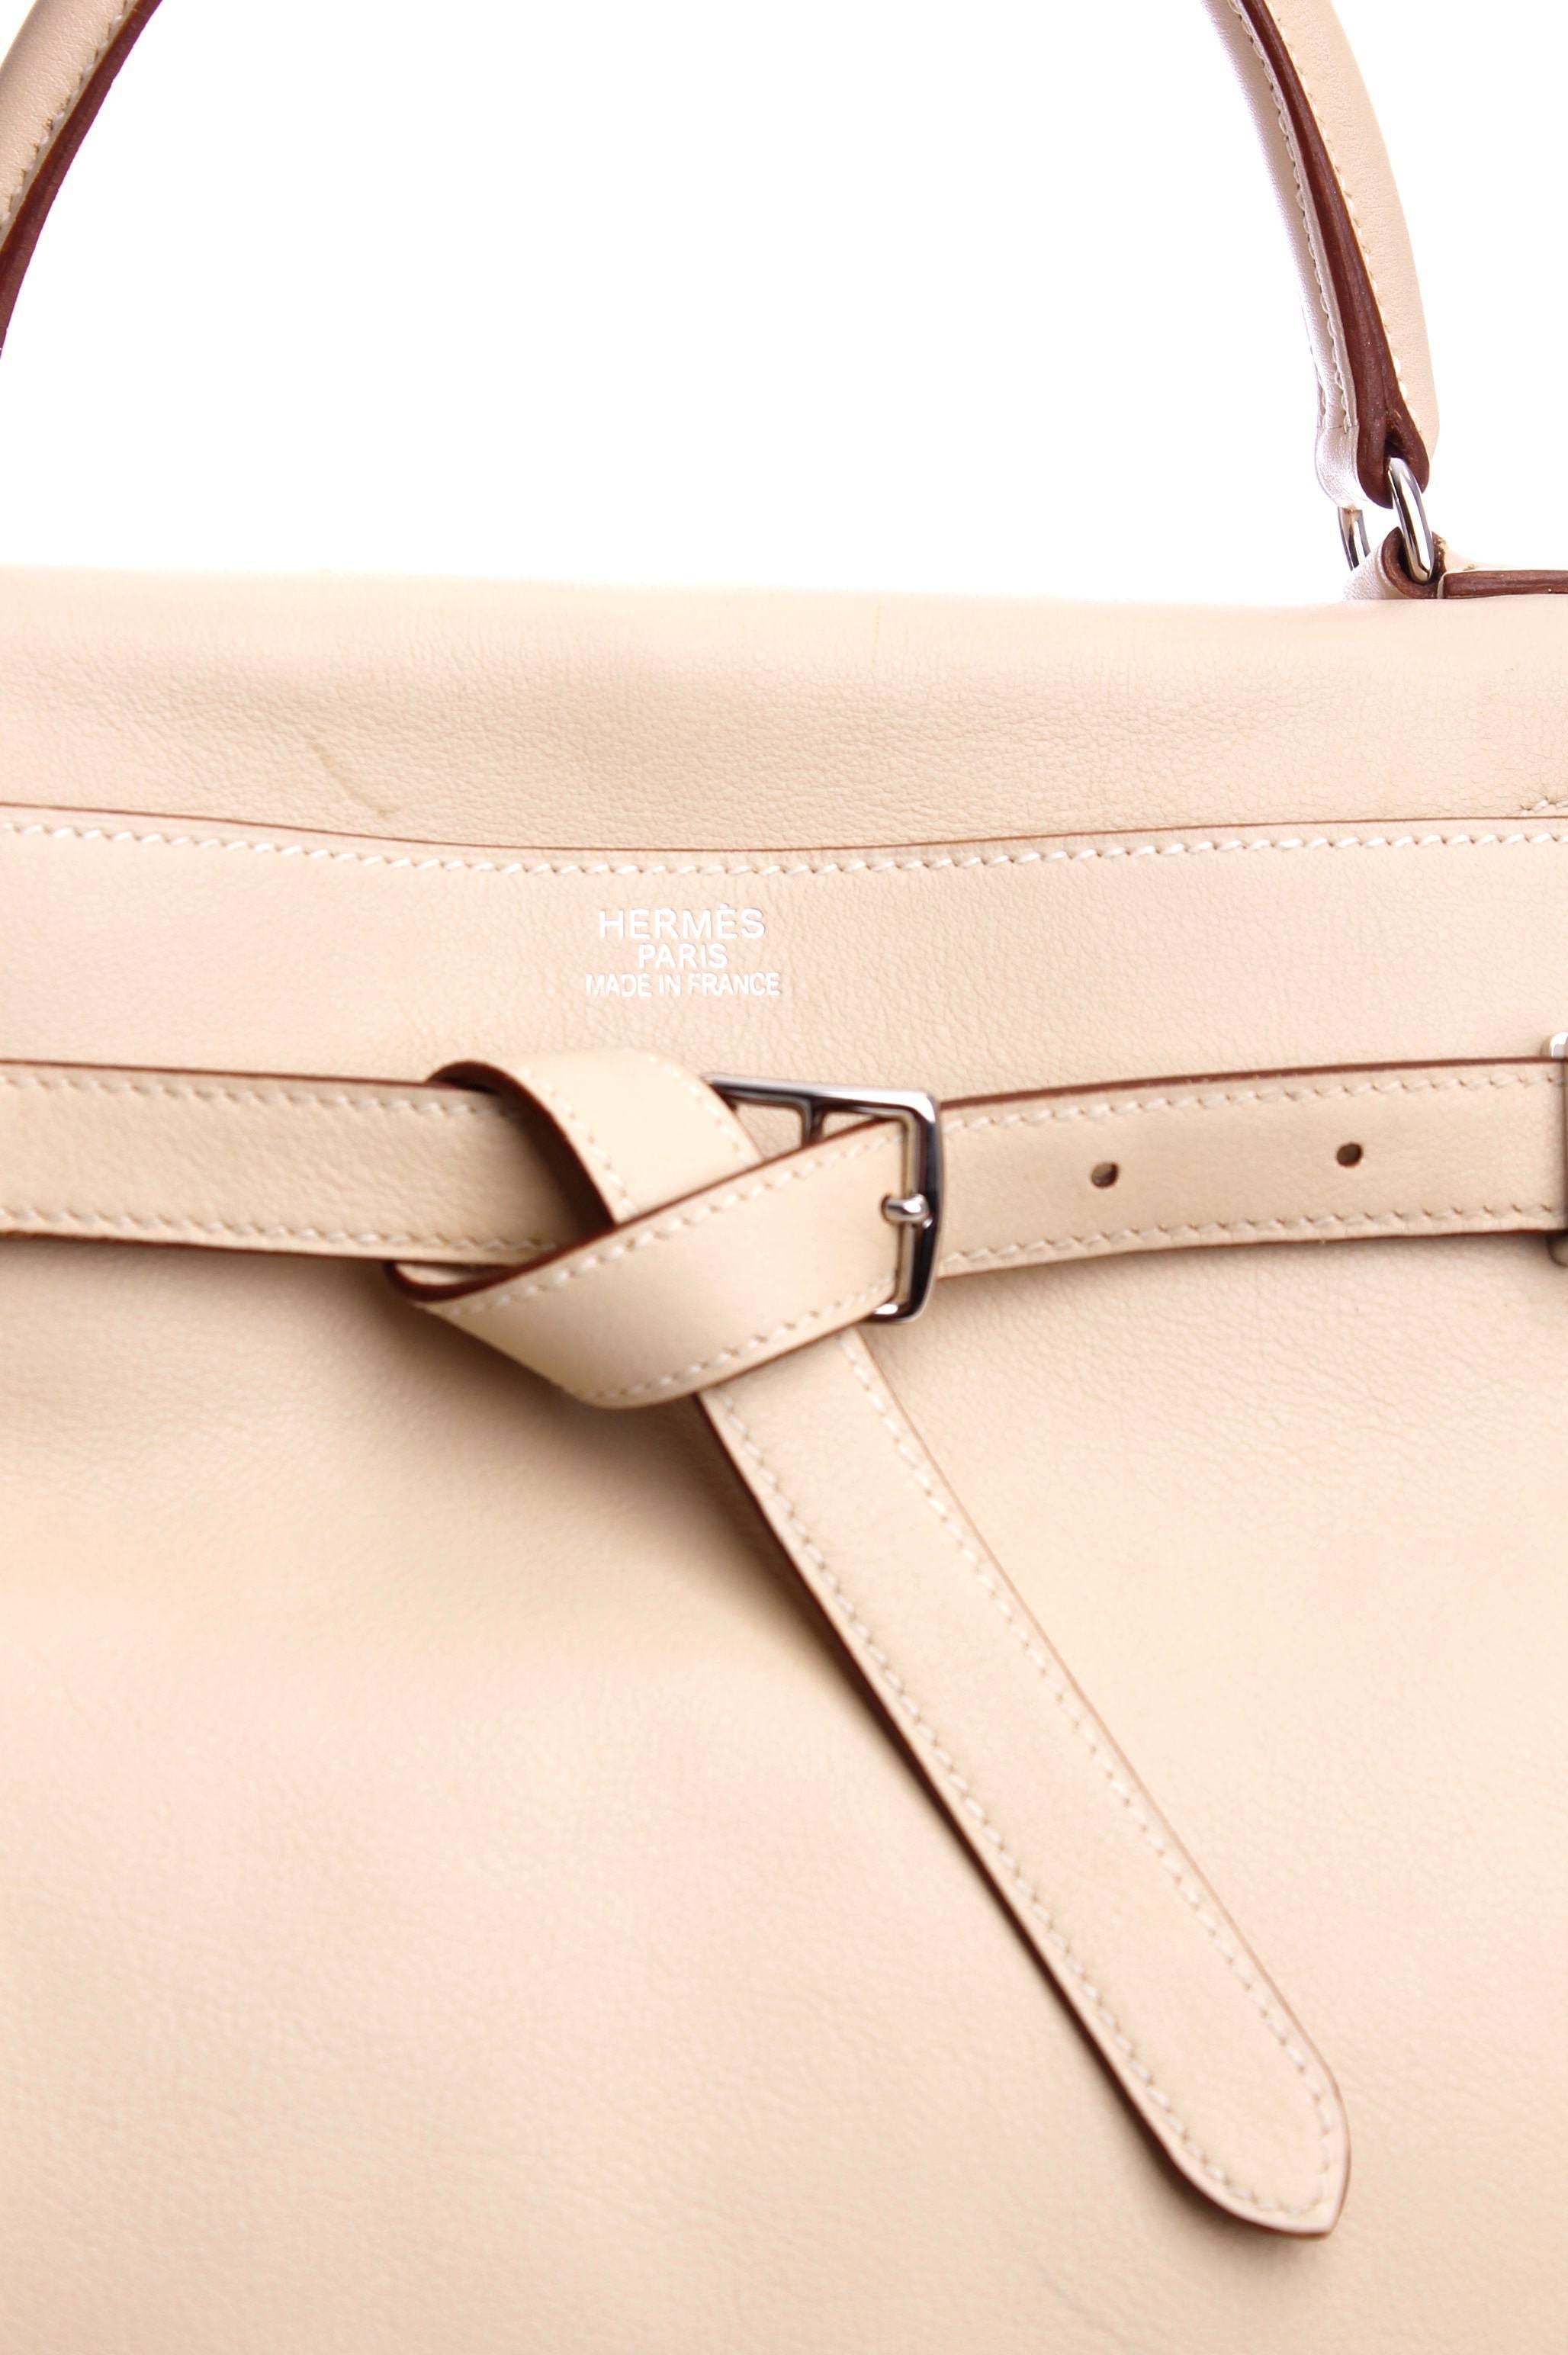 
A biscuit coloured swift leather Hermès bag, this is the Kelly Flat Bag!

The colour is very light, a little buttery, but not yellowish. Hardware is silver plated, so called Palladium, This Kelly Flat Bag does not have the traditional Kelly